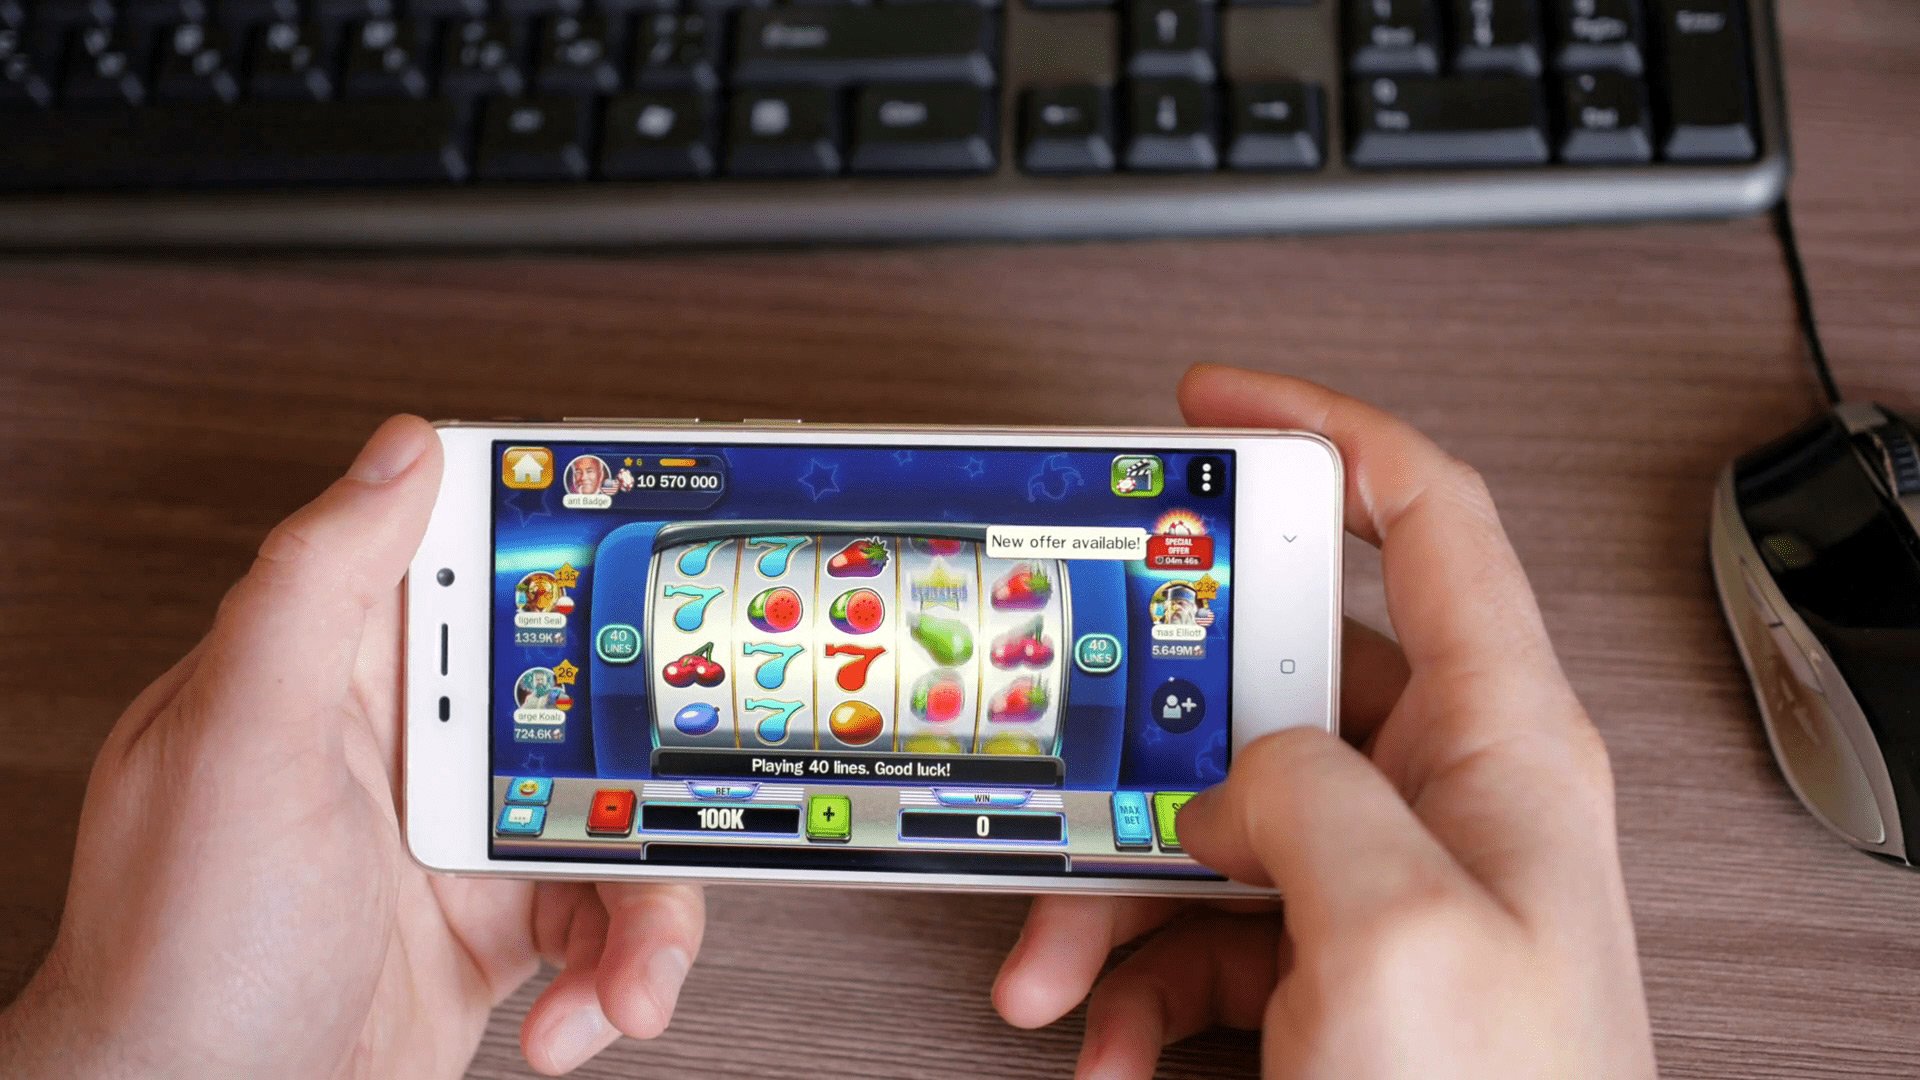 UK: Percentage of gamblers seeking help for problems related to online slots nearly doubles in five years